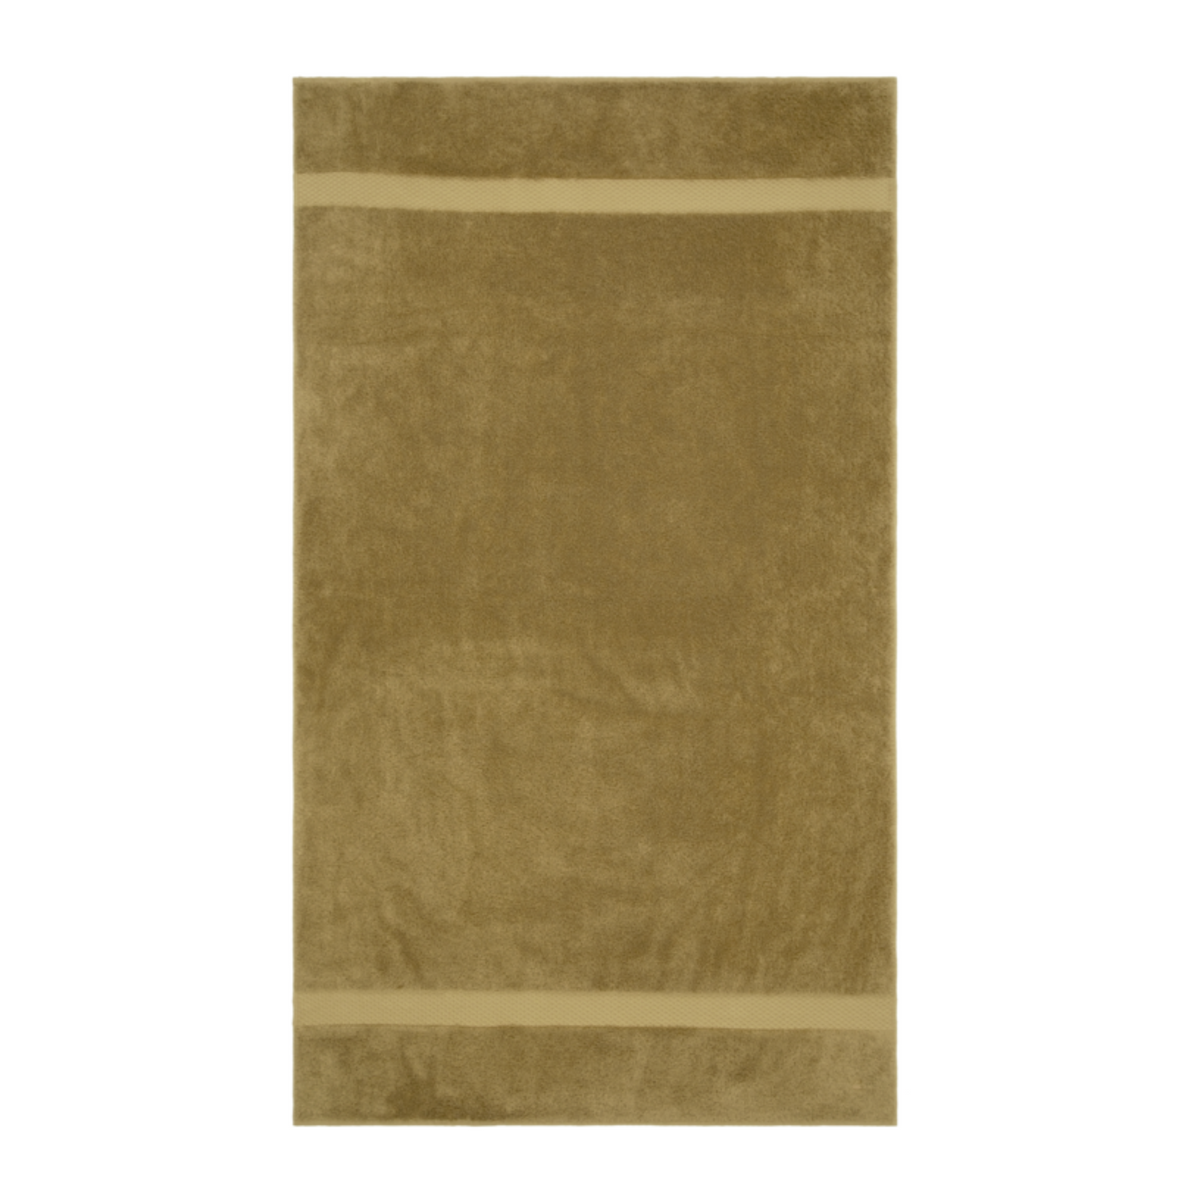 Hand Towel of Yves Delorme Etoile Bath Collection in Bronze Color